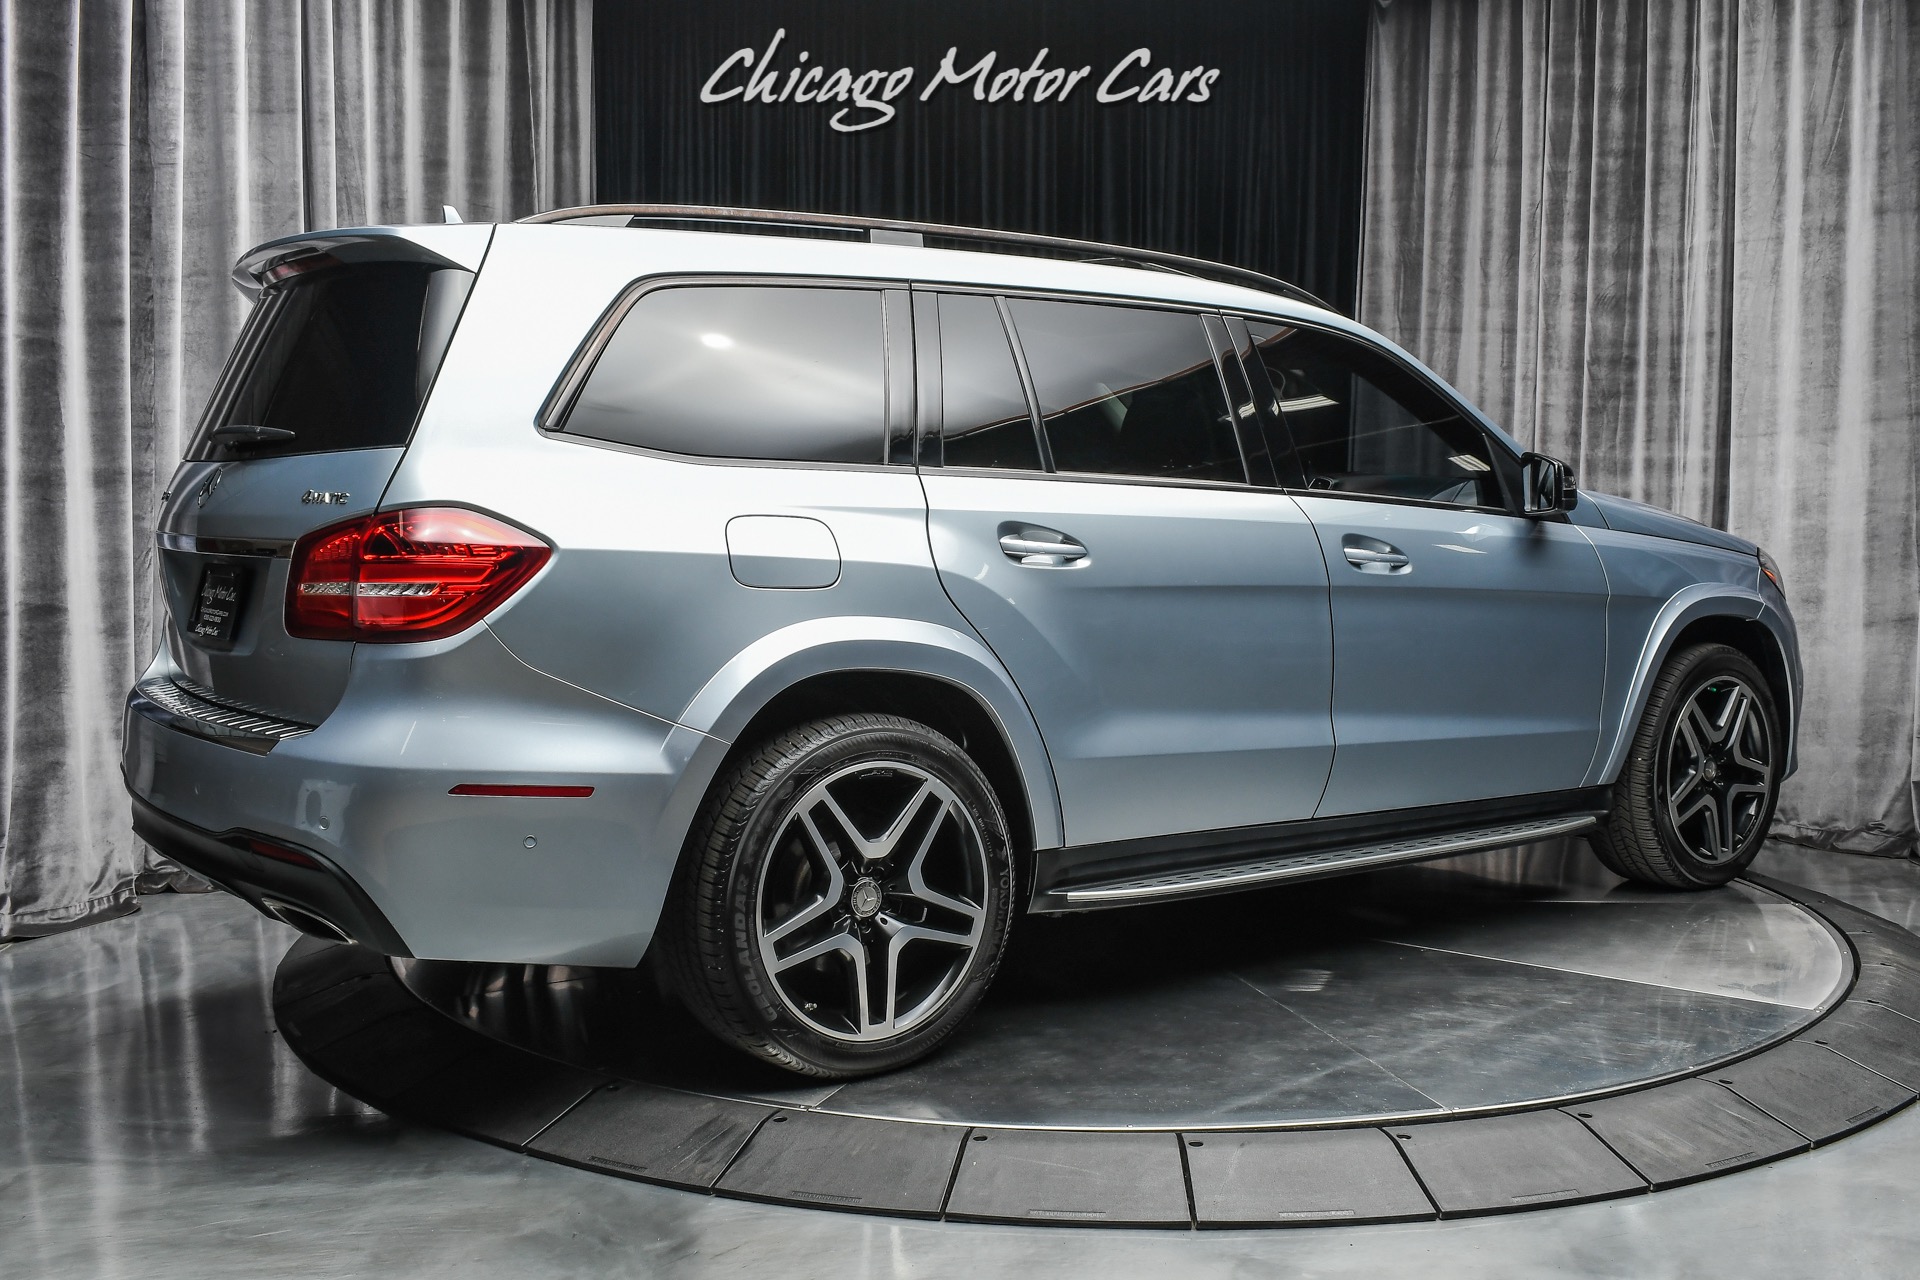 Used-2017-Mercedes-Benz-GLS550-4-Matic-SUV-104k-MSRP-SPECIAL-ORDER-VEHICLE